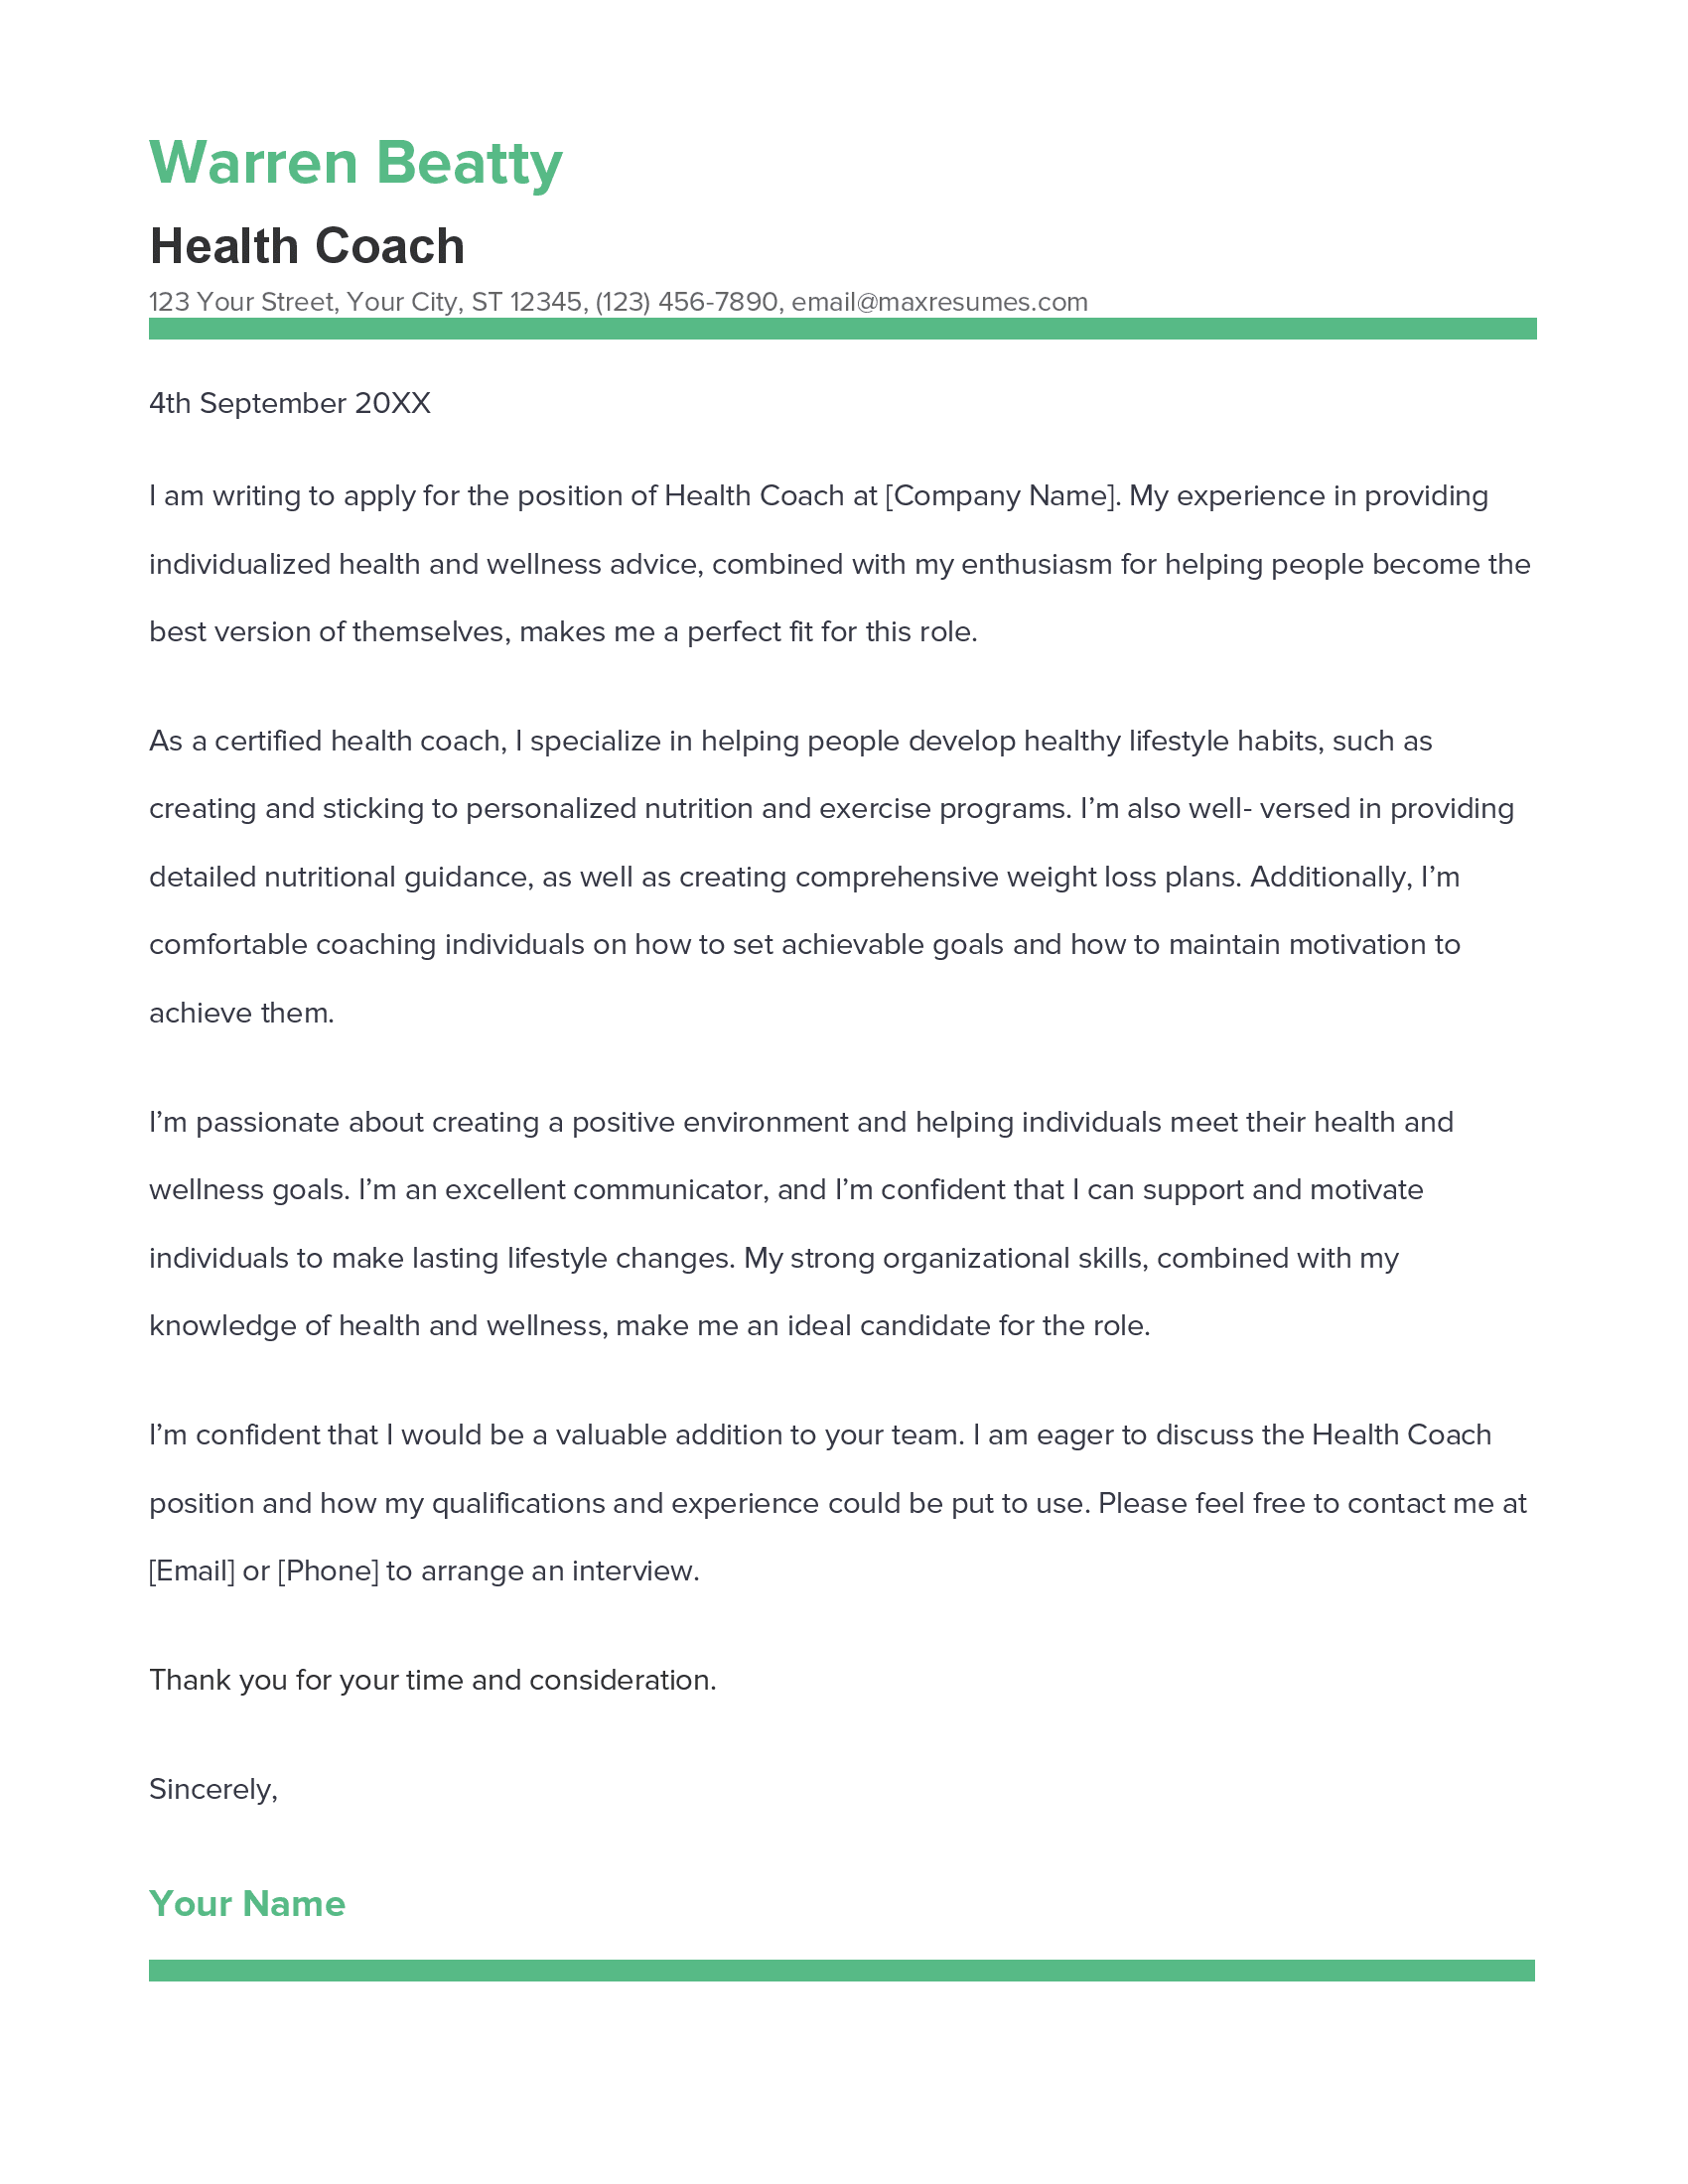 Health Coach Cover Letter Example